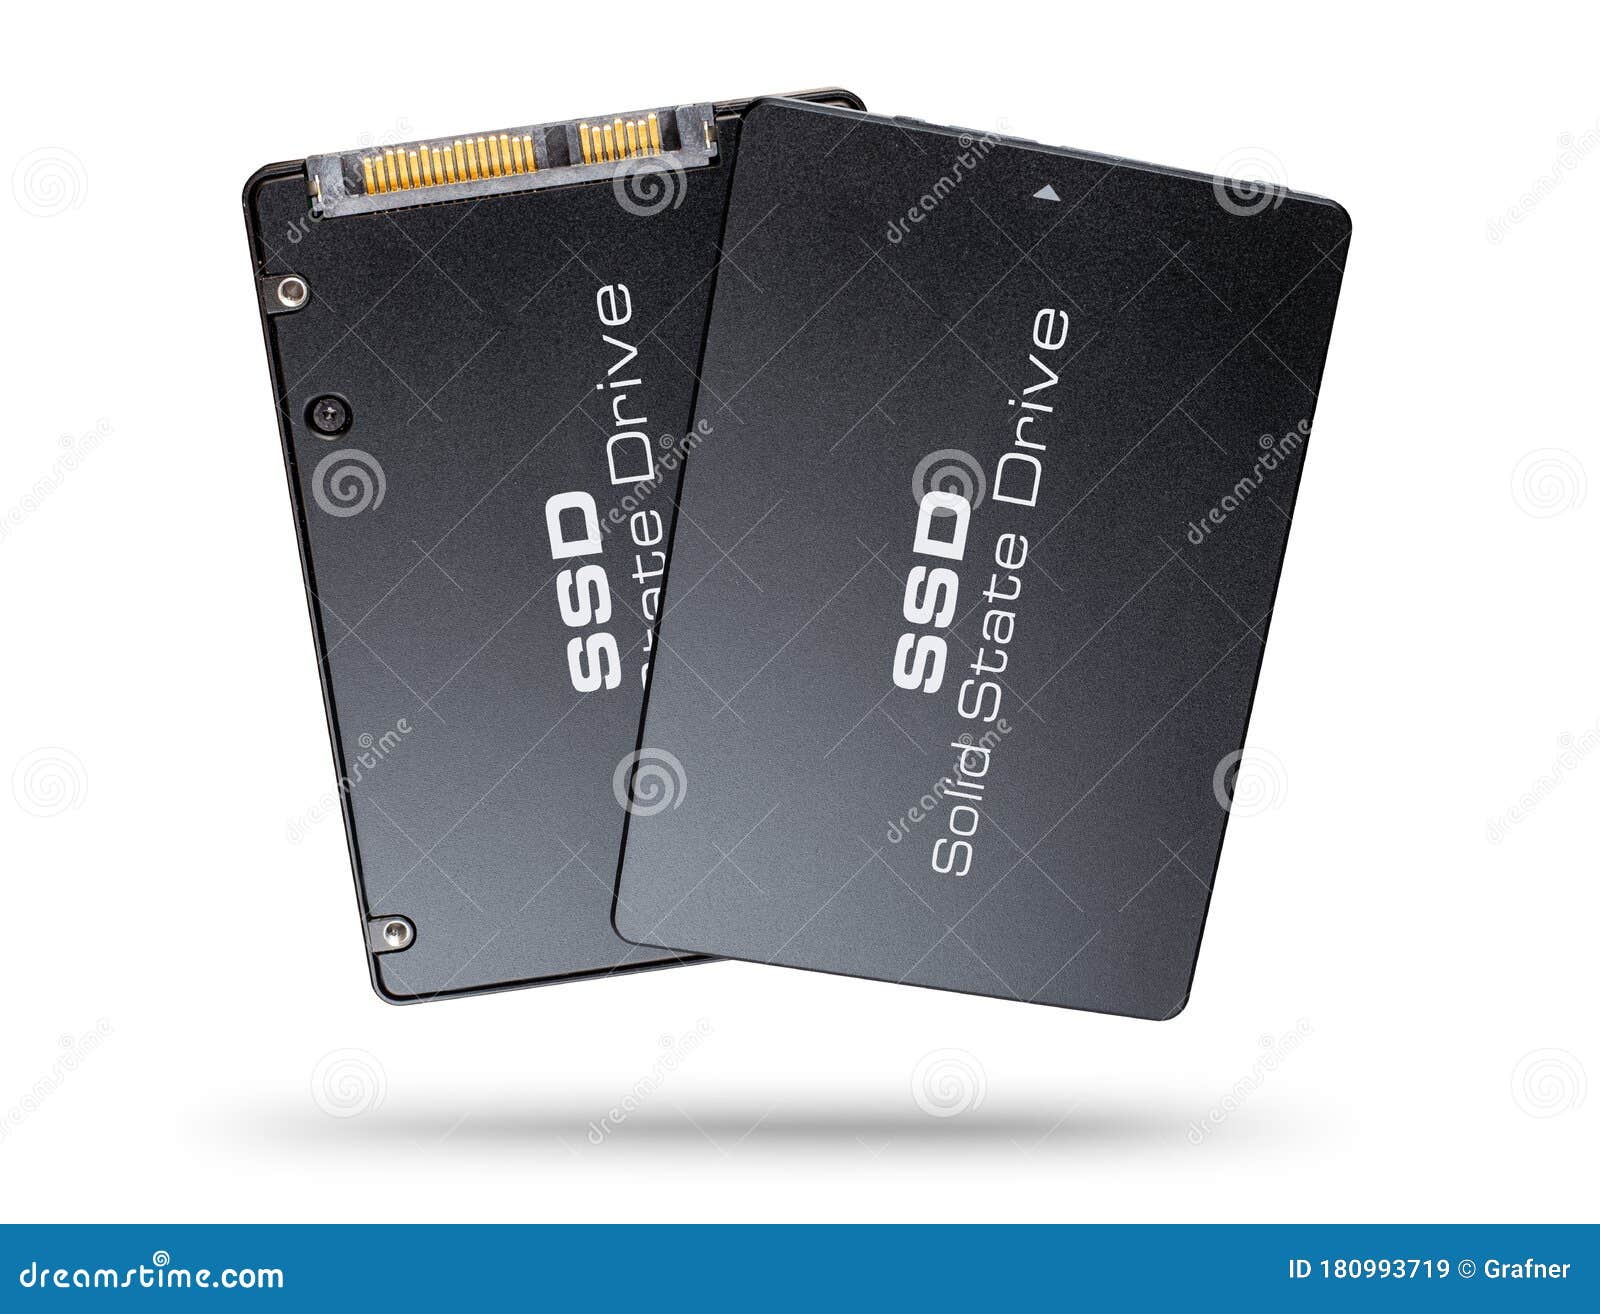 lobby Sheet Vibrate Pair of Black Golden SSD Solid State Drive Computer Hard Disk Flash Memory  Front and Back Side Isolated White Background. Pc Data Stock Image - Image  of data, equipment: 180993719